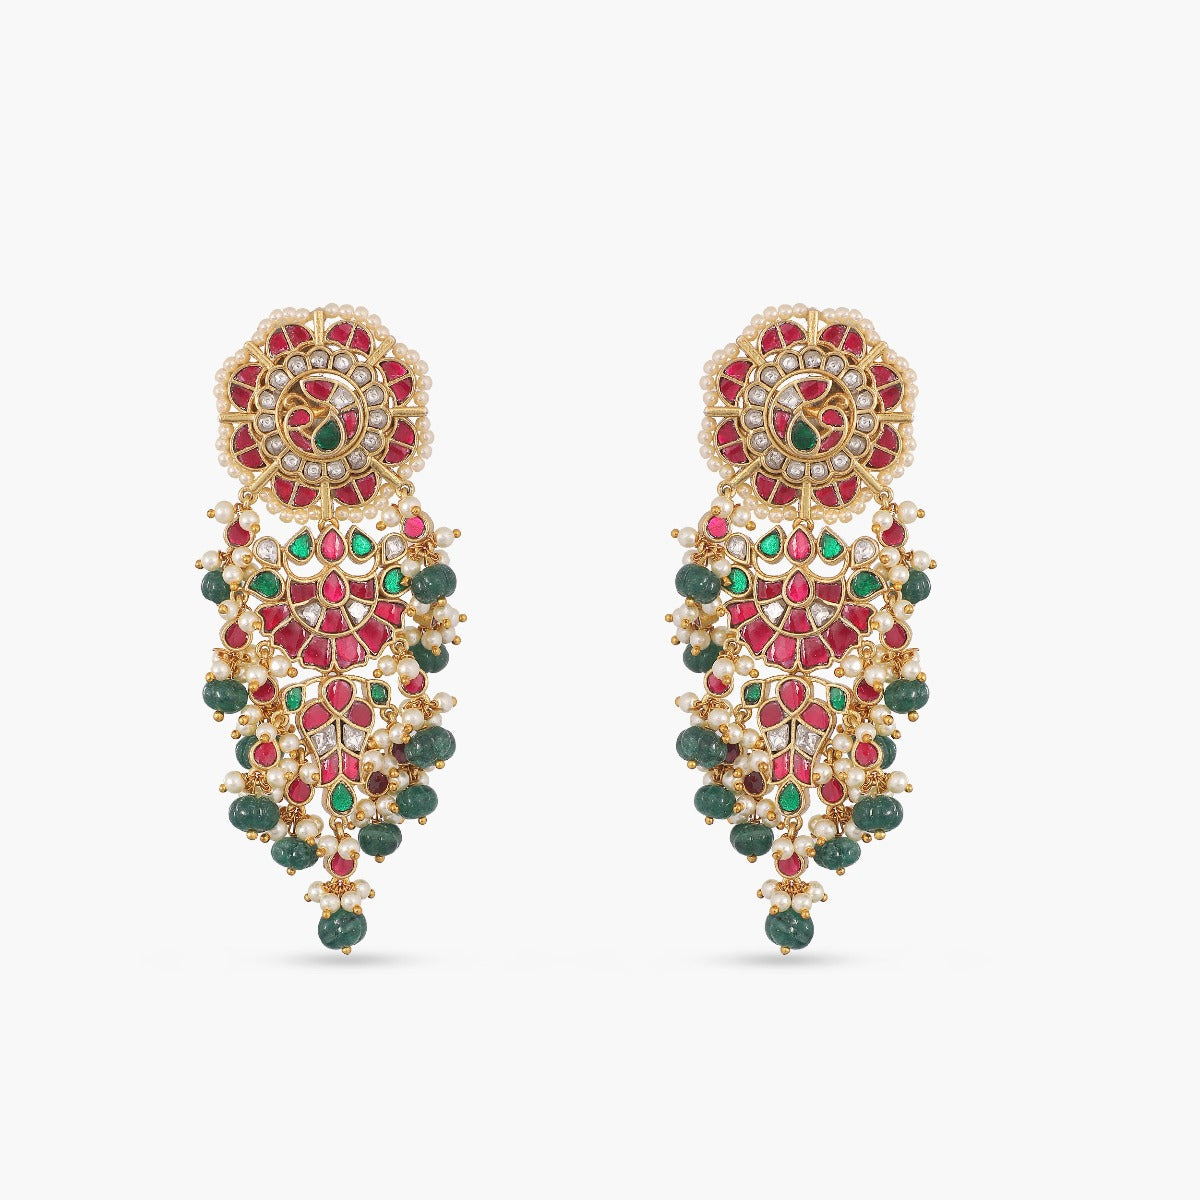 A picture of an Indian artificial gold plated necklace set with floral designs, red and green gemstones, and pearl embellishments in jadau style.